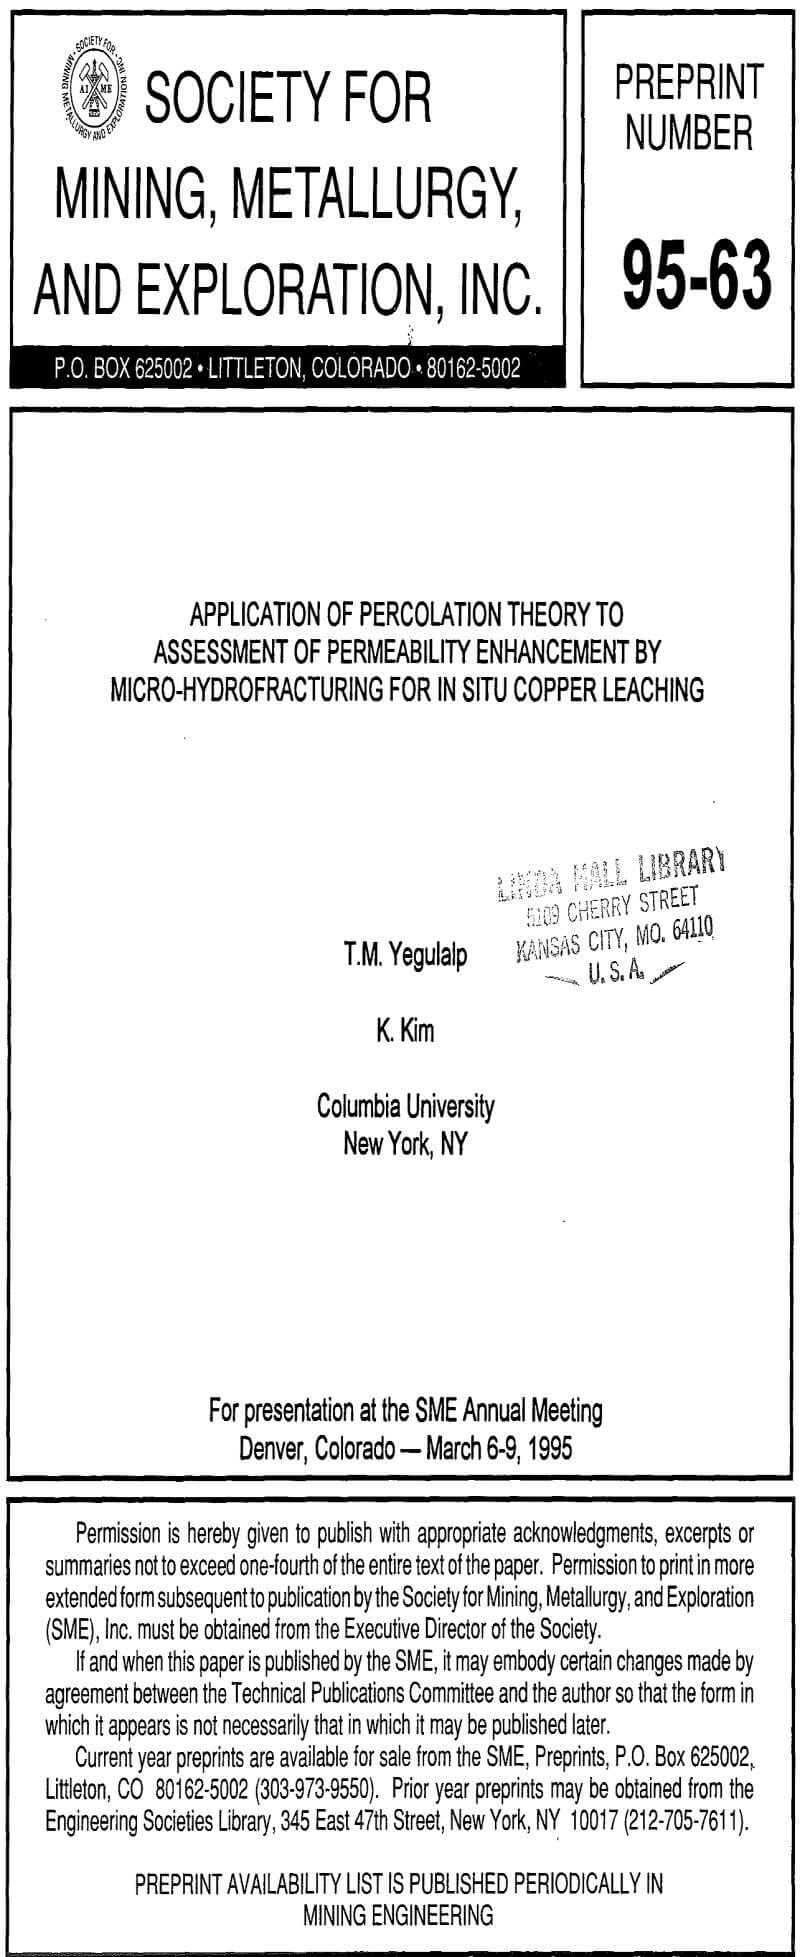 application of percolation theory to assessment of permeability enhancement by micro-hydrofracturing for in situ copper leaching